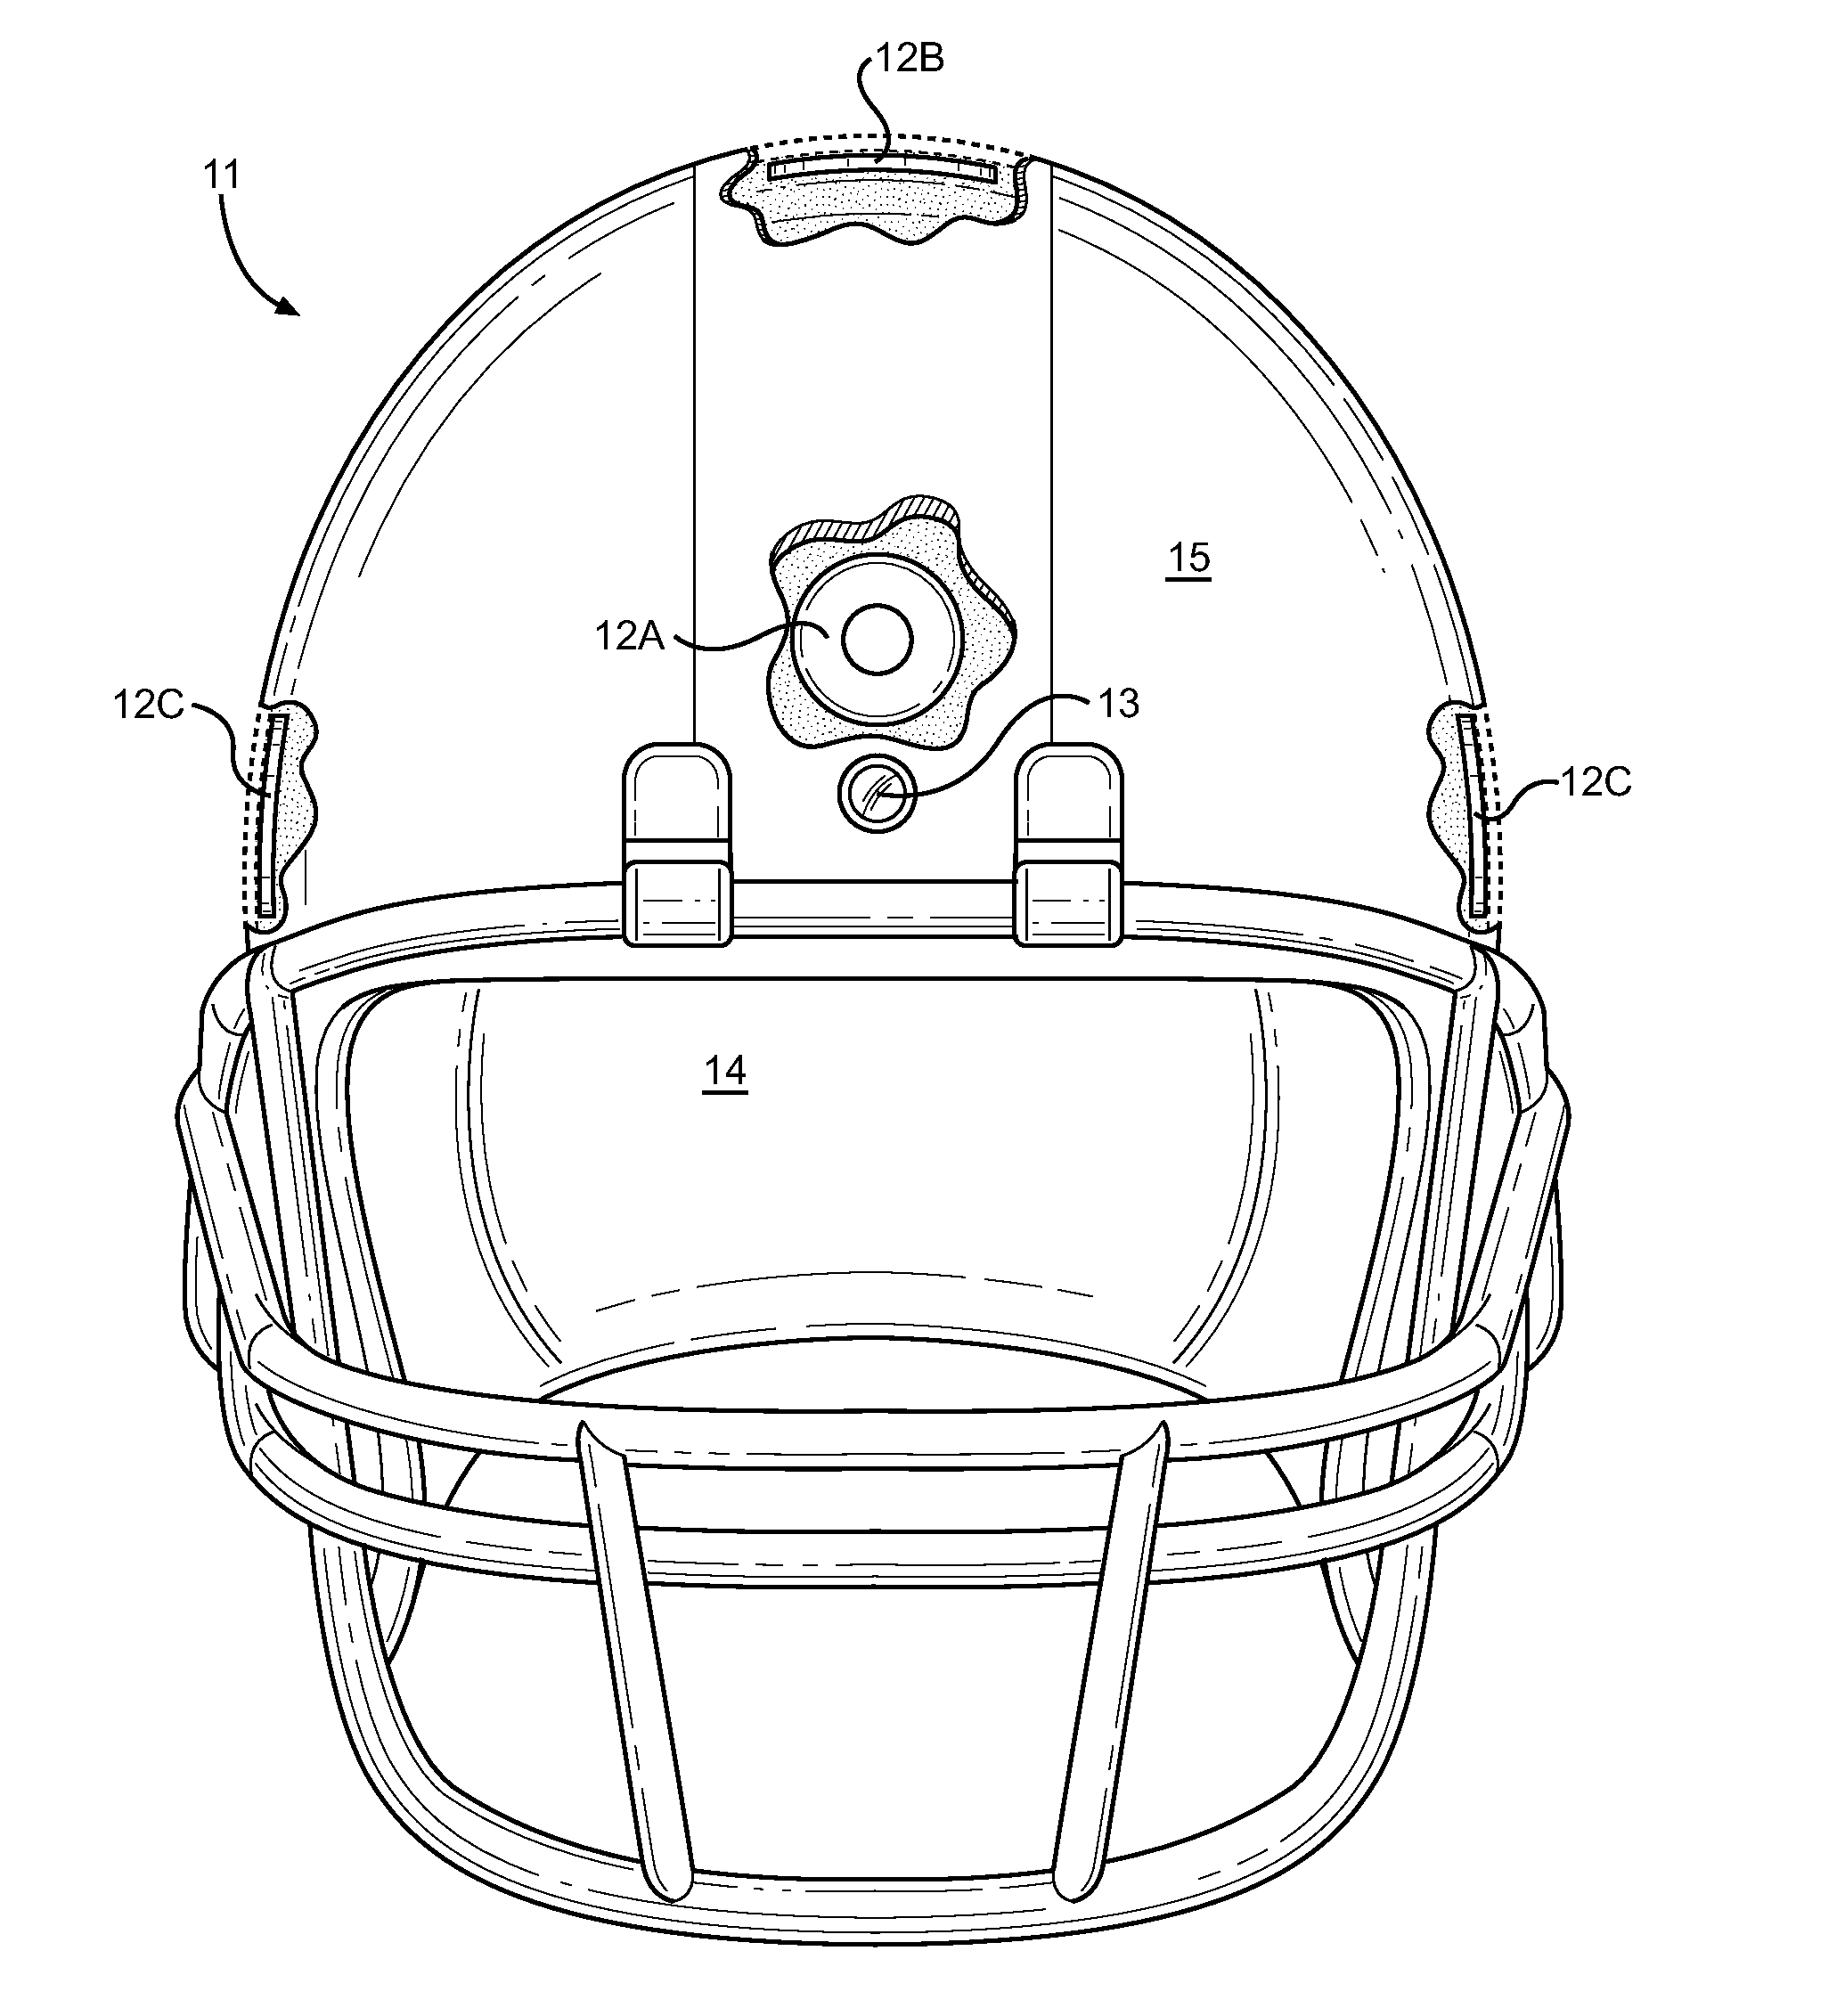 Helmet Head Impact Tracking and Monitoring System